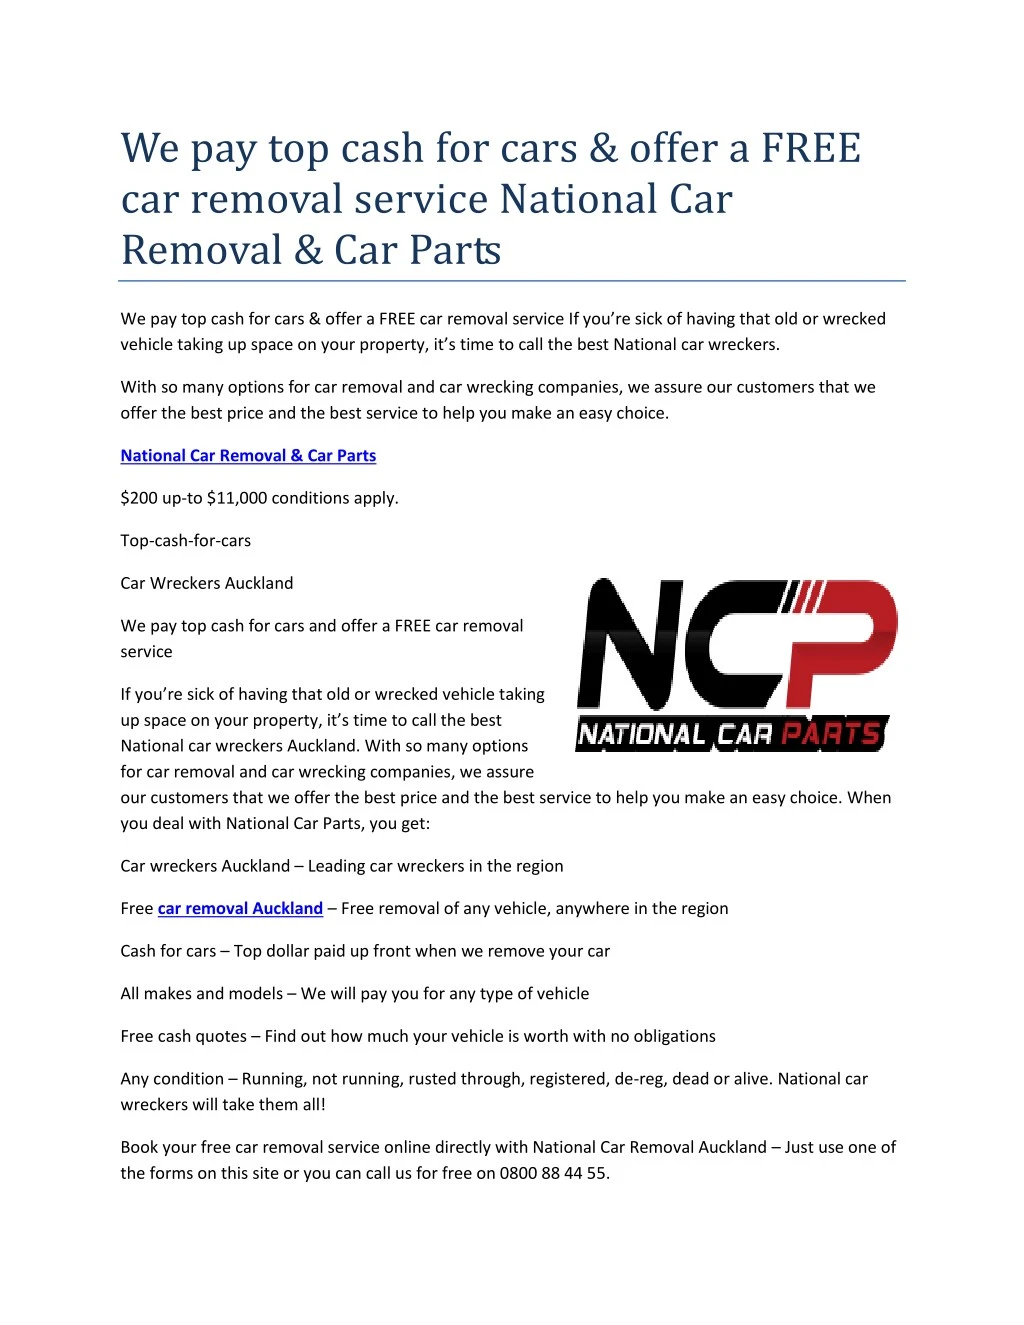 we pay top cash for cars offer a free car removal